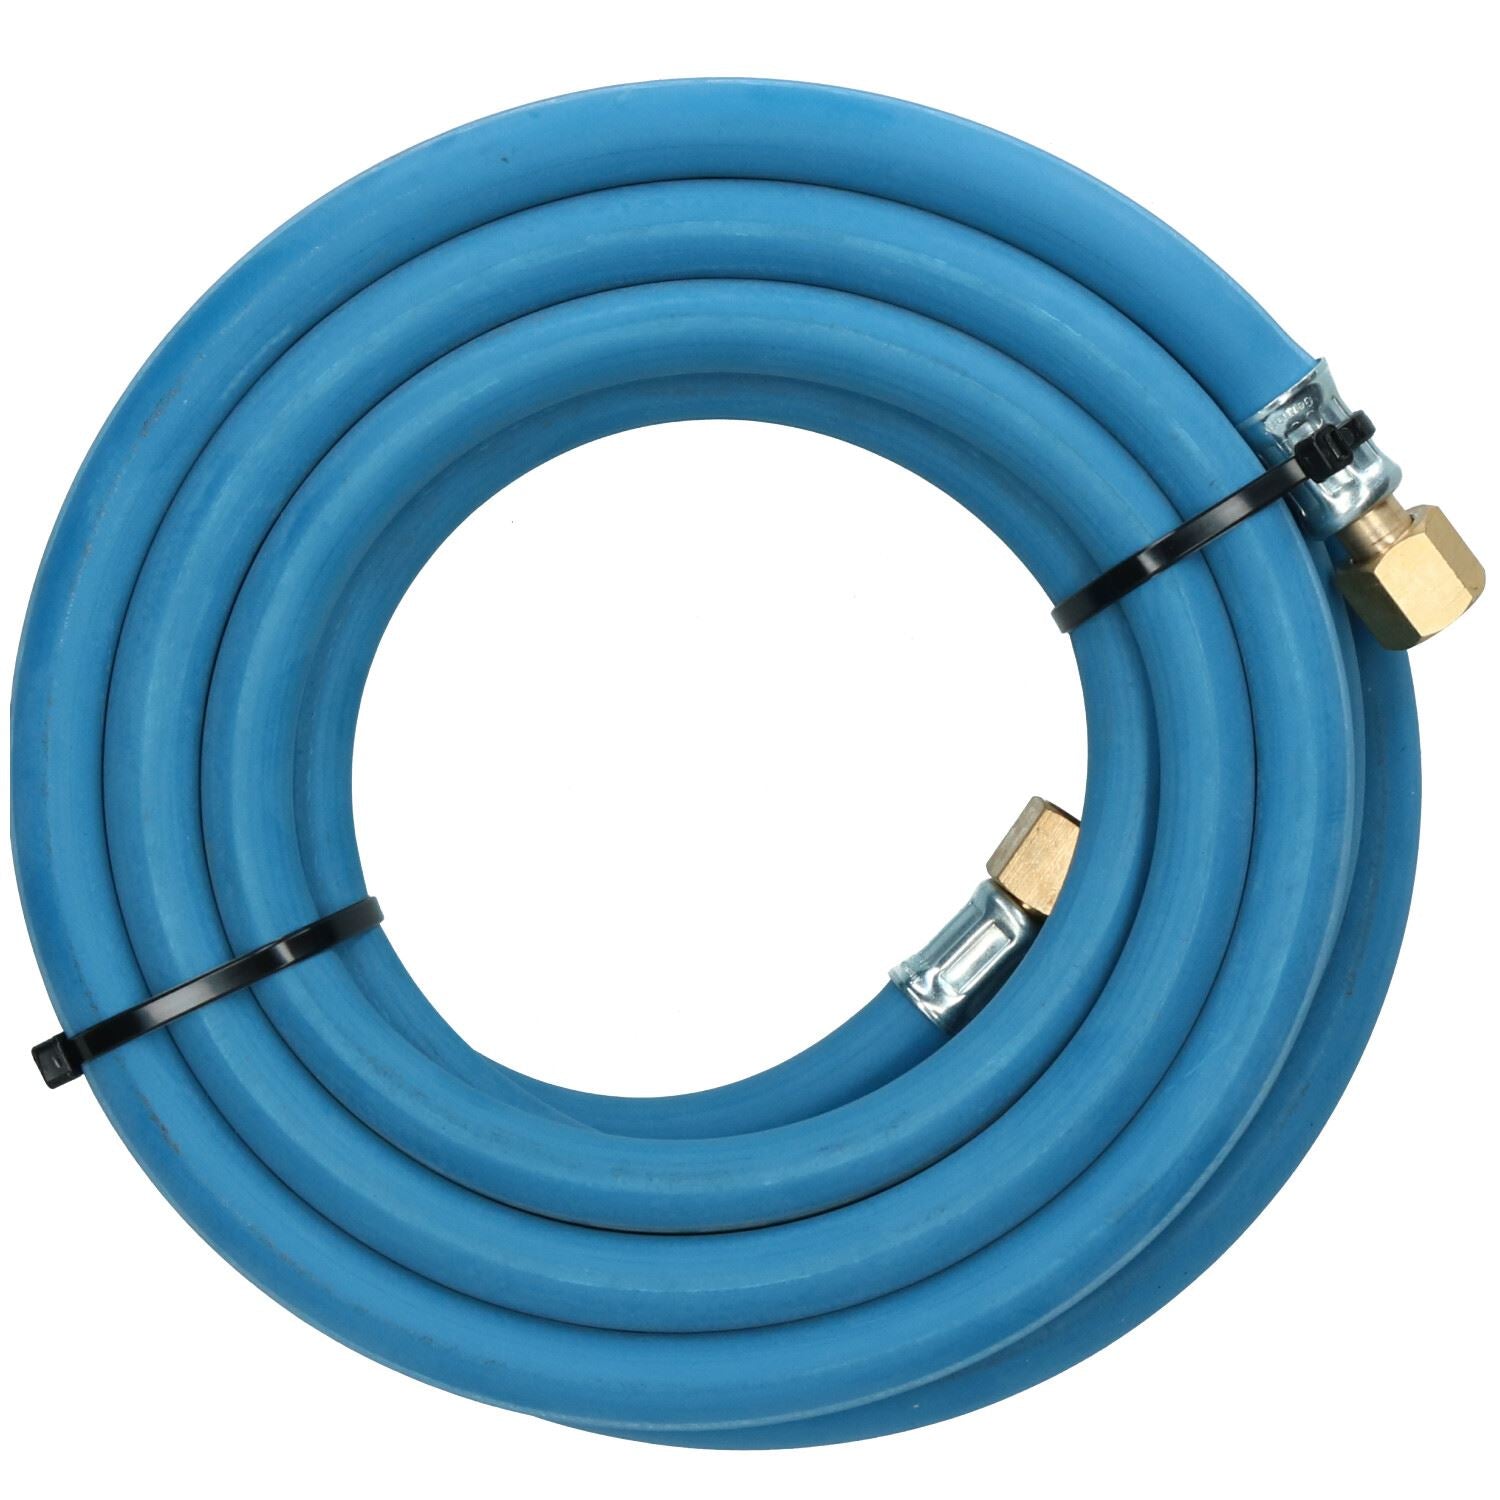 Single Oxygen Fitted Rubber Hose Pipe Cutting & Welding 5M 3/8" BSP Gas Blue